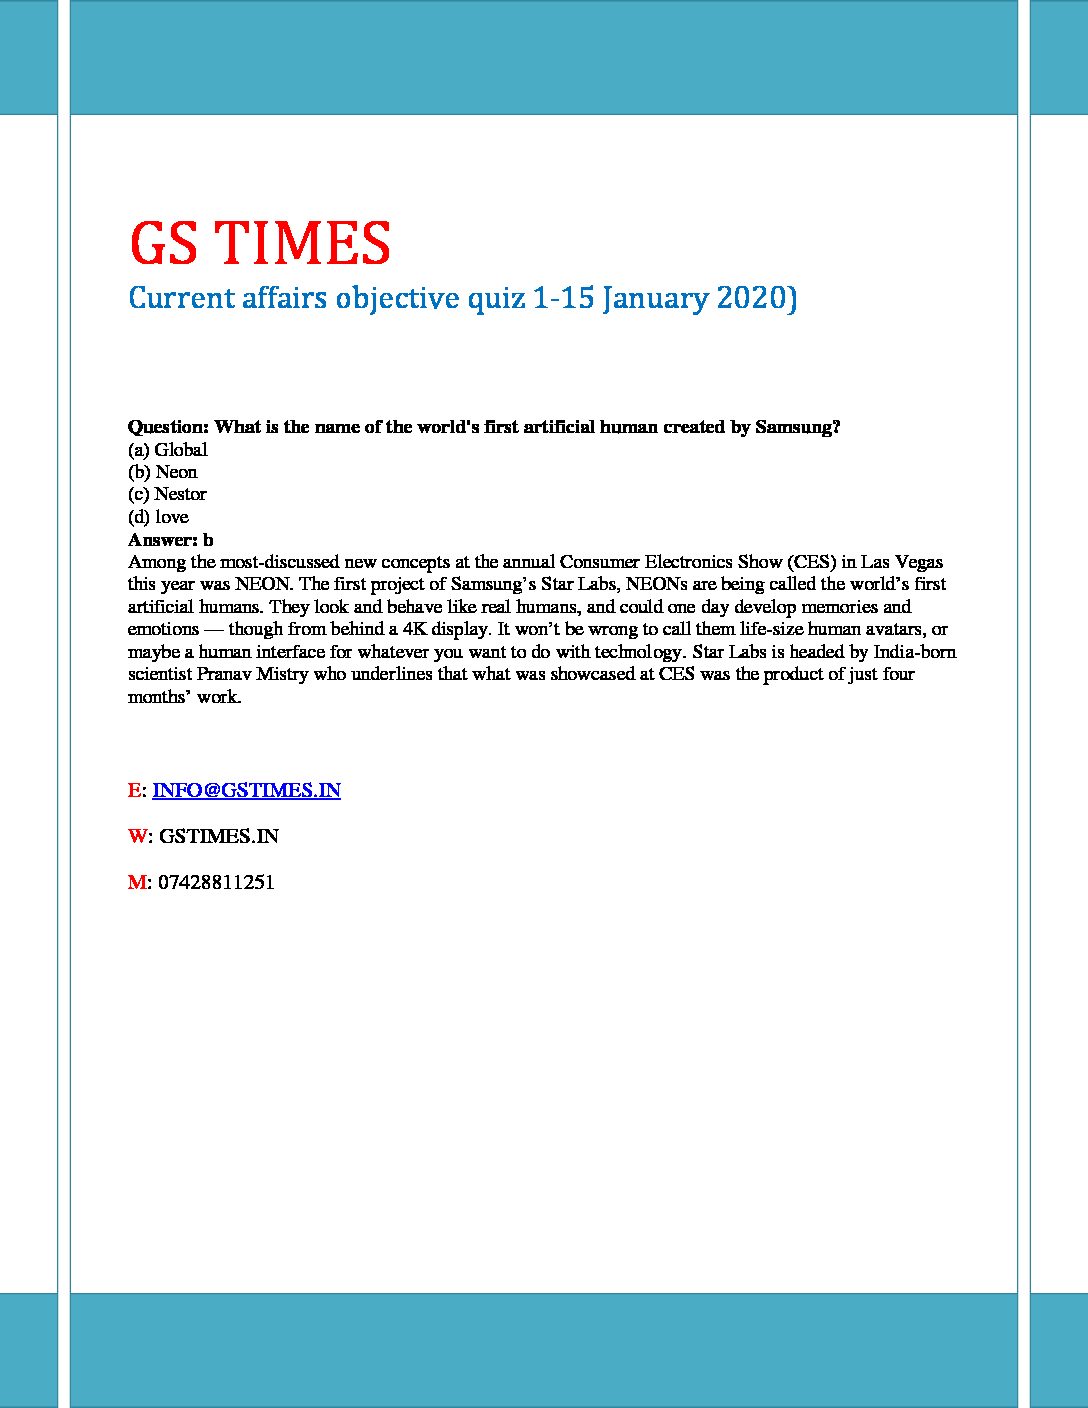 Current Affairs Objective Quiz with explanation pdf 1-15 January 2020